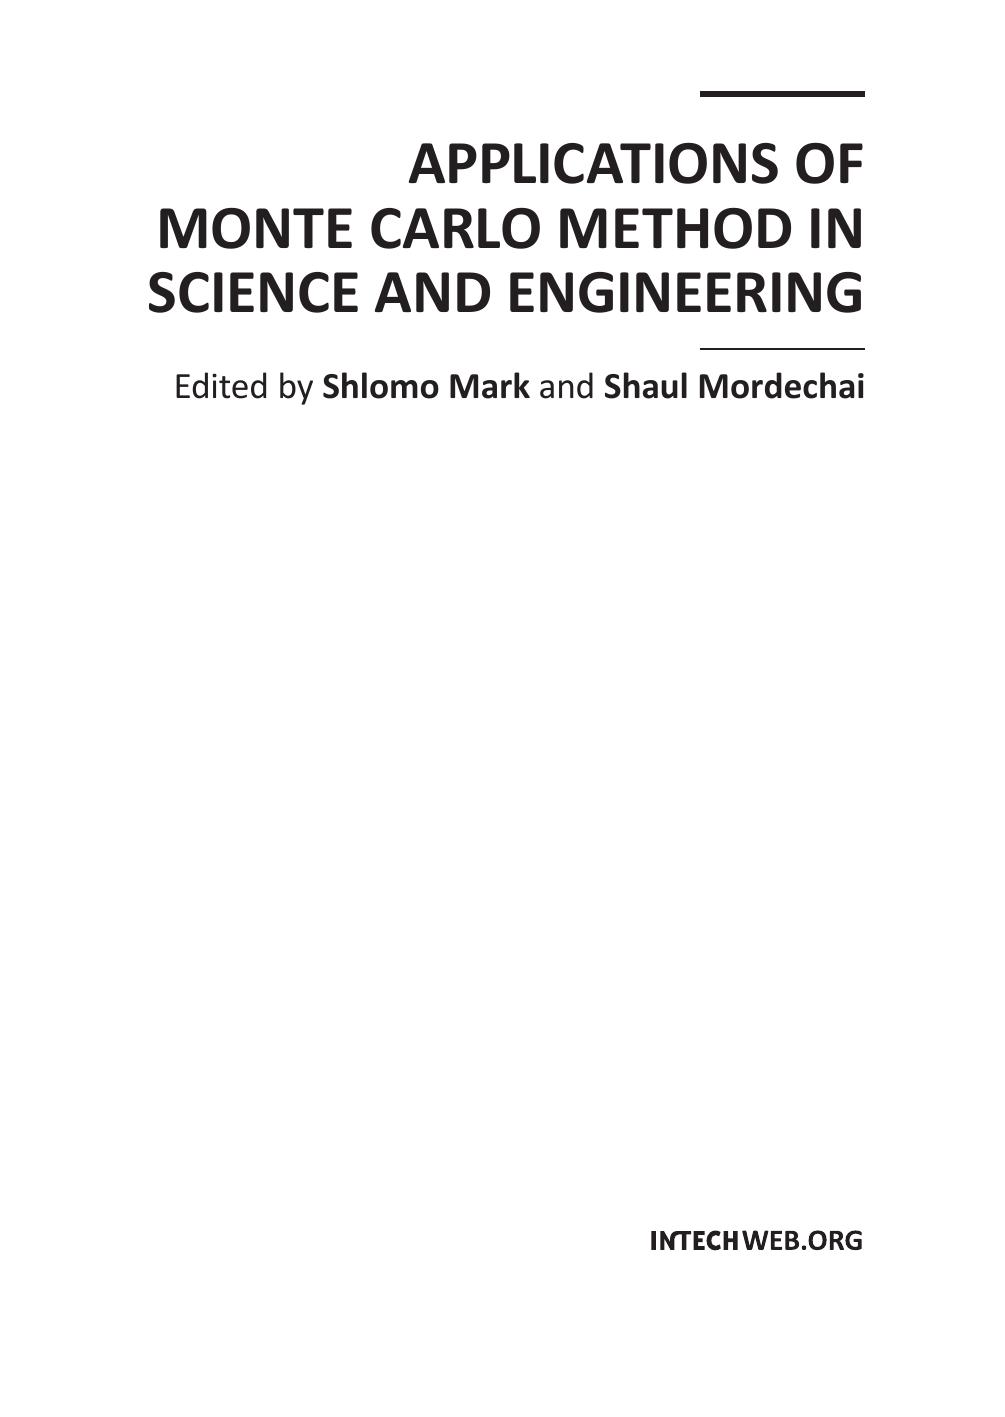 Applications of Monte Carlo Method in Science and Engineering.indd